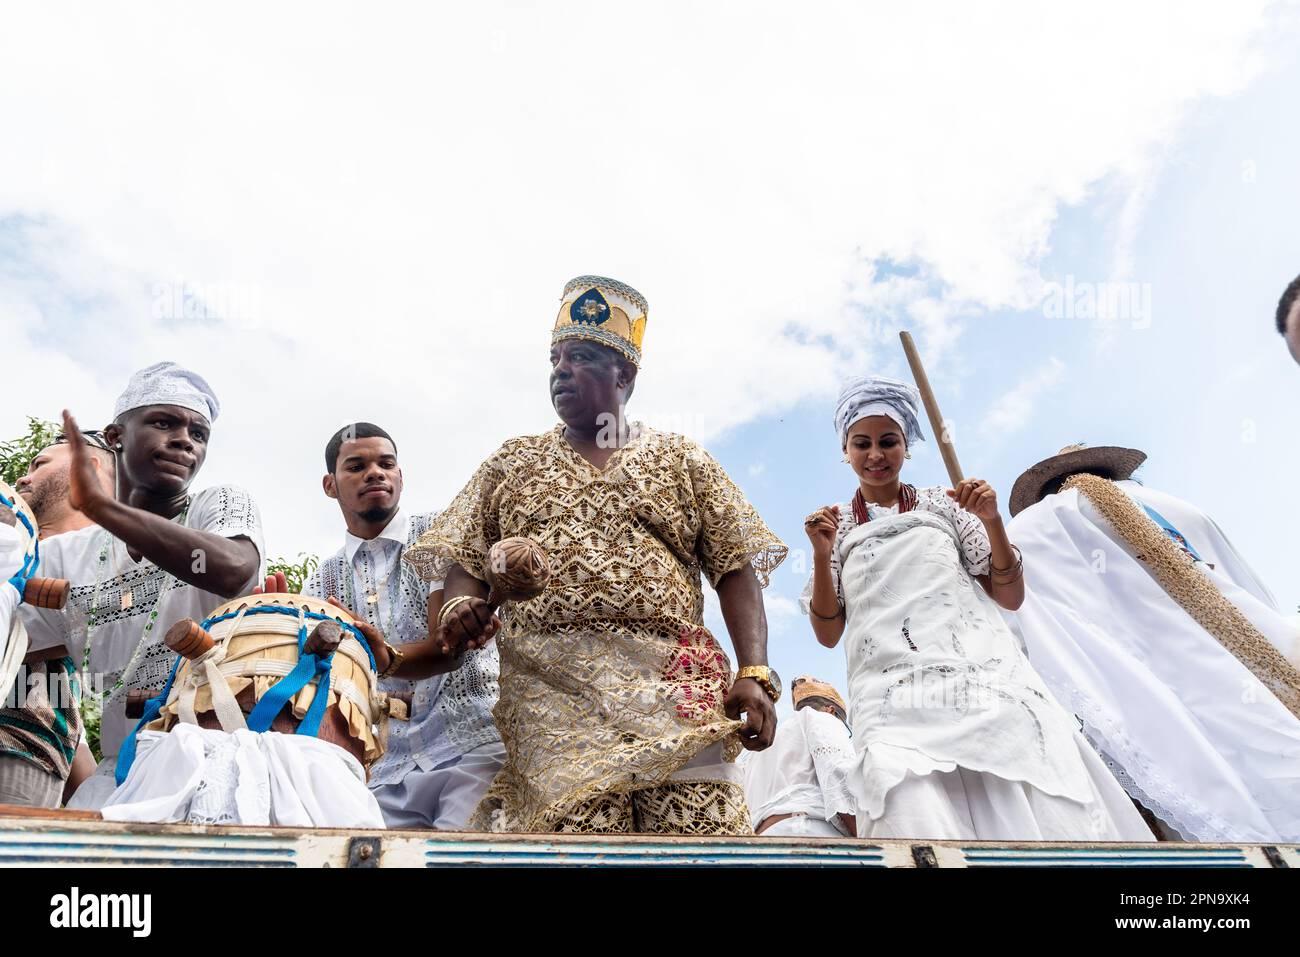 Santo Amaro, Bahia, Brazil - May 15, 2022: Candomble members are seen playing and singing during the Bembe do Mercado religious festivities in Santo A Stock Photo